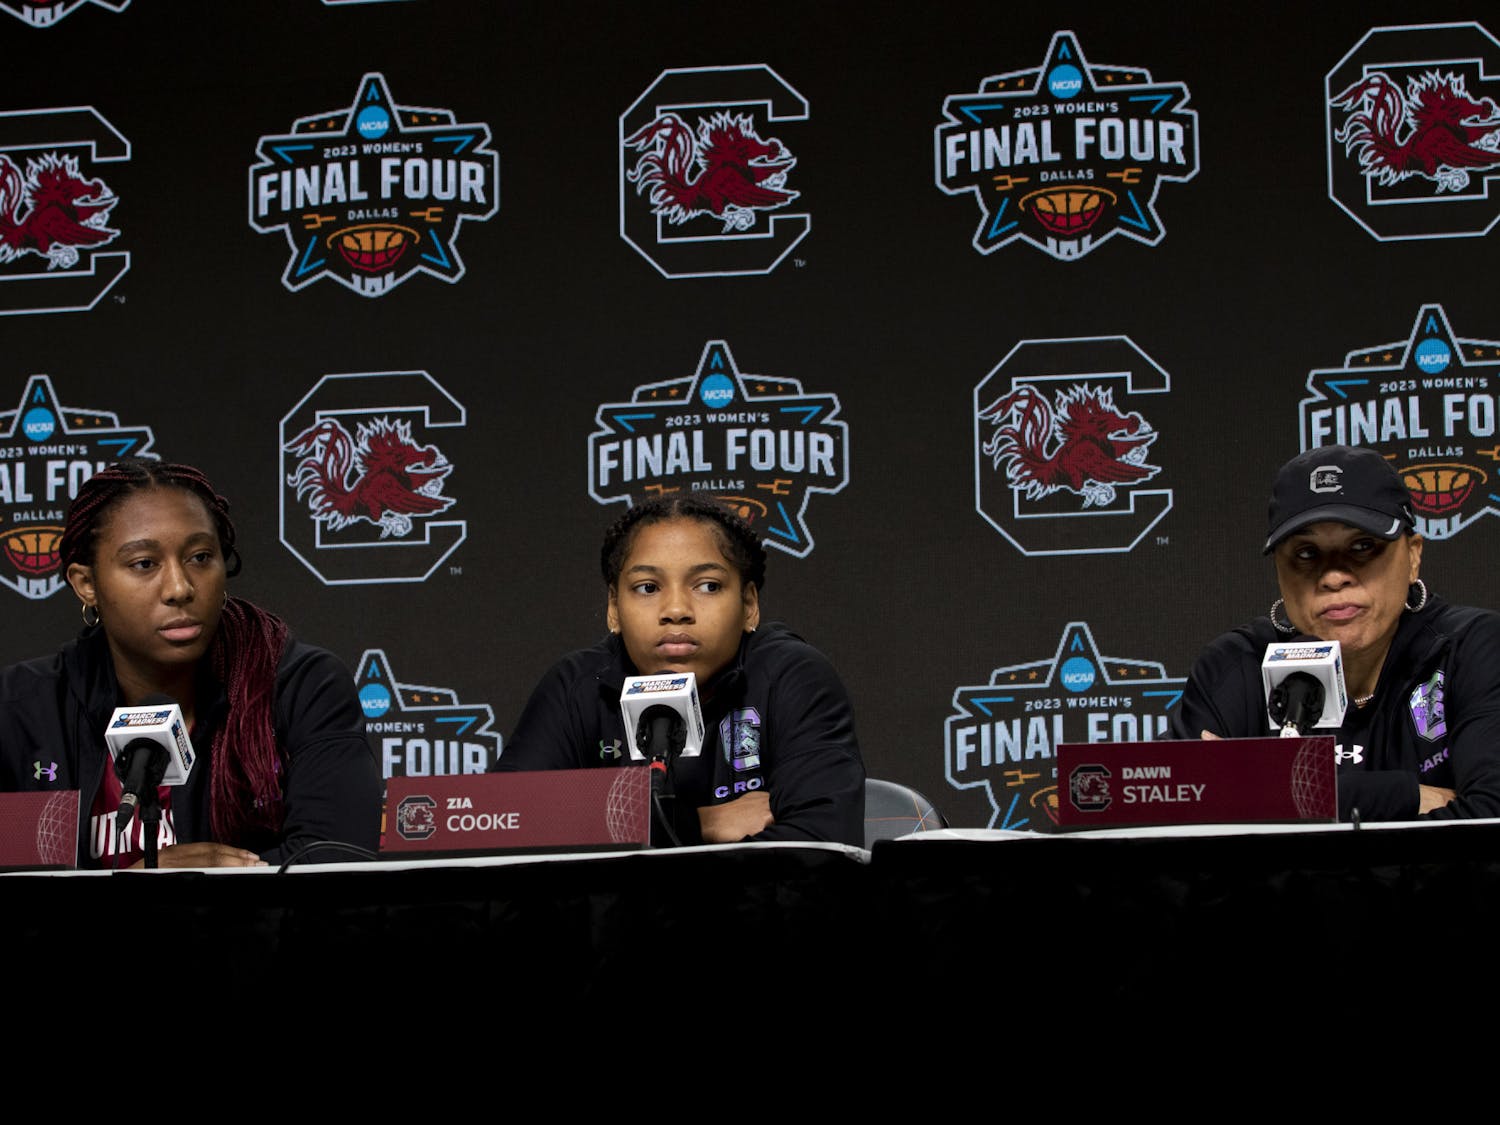 Senior guard Zia Cooke, senior forward Aliyah Boston and head coach Dawn Staley keep a stern composure while listening to the media's questions at the Women’s Final Four Pregame Press Conference on March 30, 2023, in Dallas, Texas. This is Staley’s third consecutive year leading the Gamecocks to the Final Four.&nbsp;